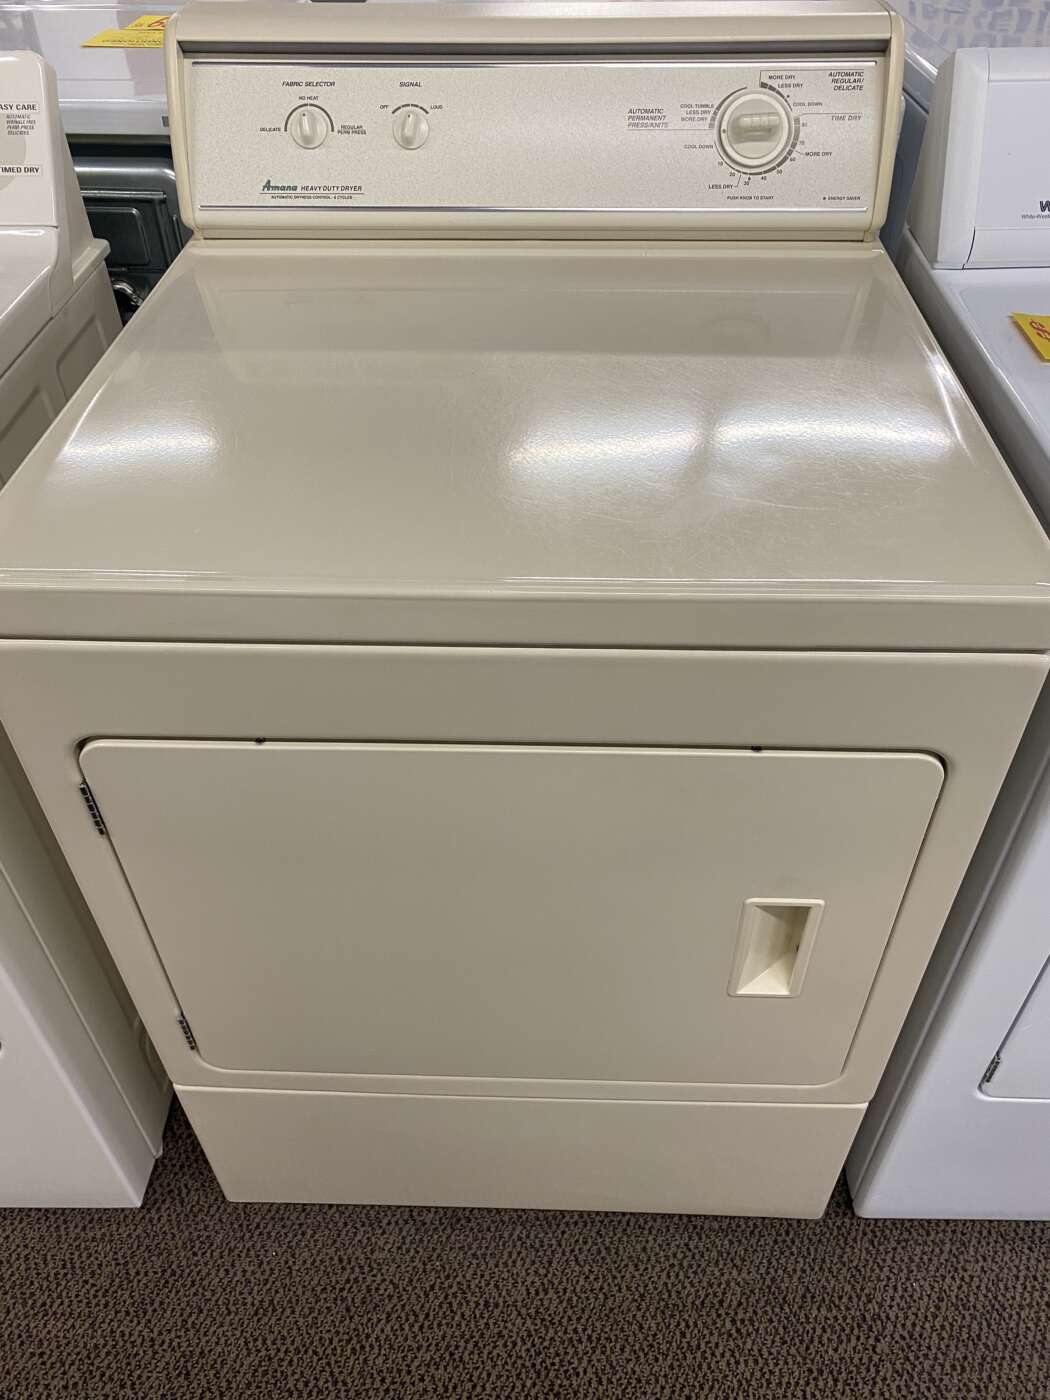 Reconditioned AMANA Electric Dryer ( Bisque)